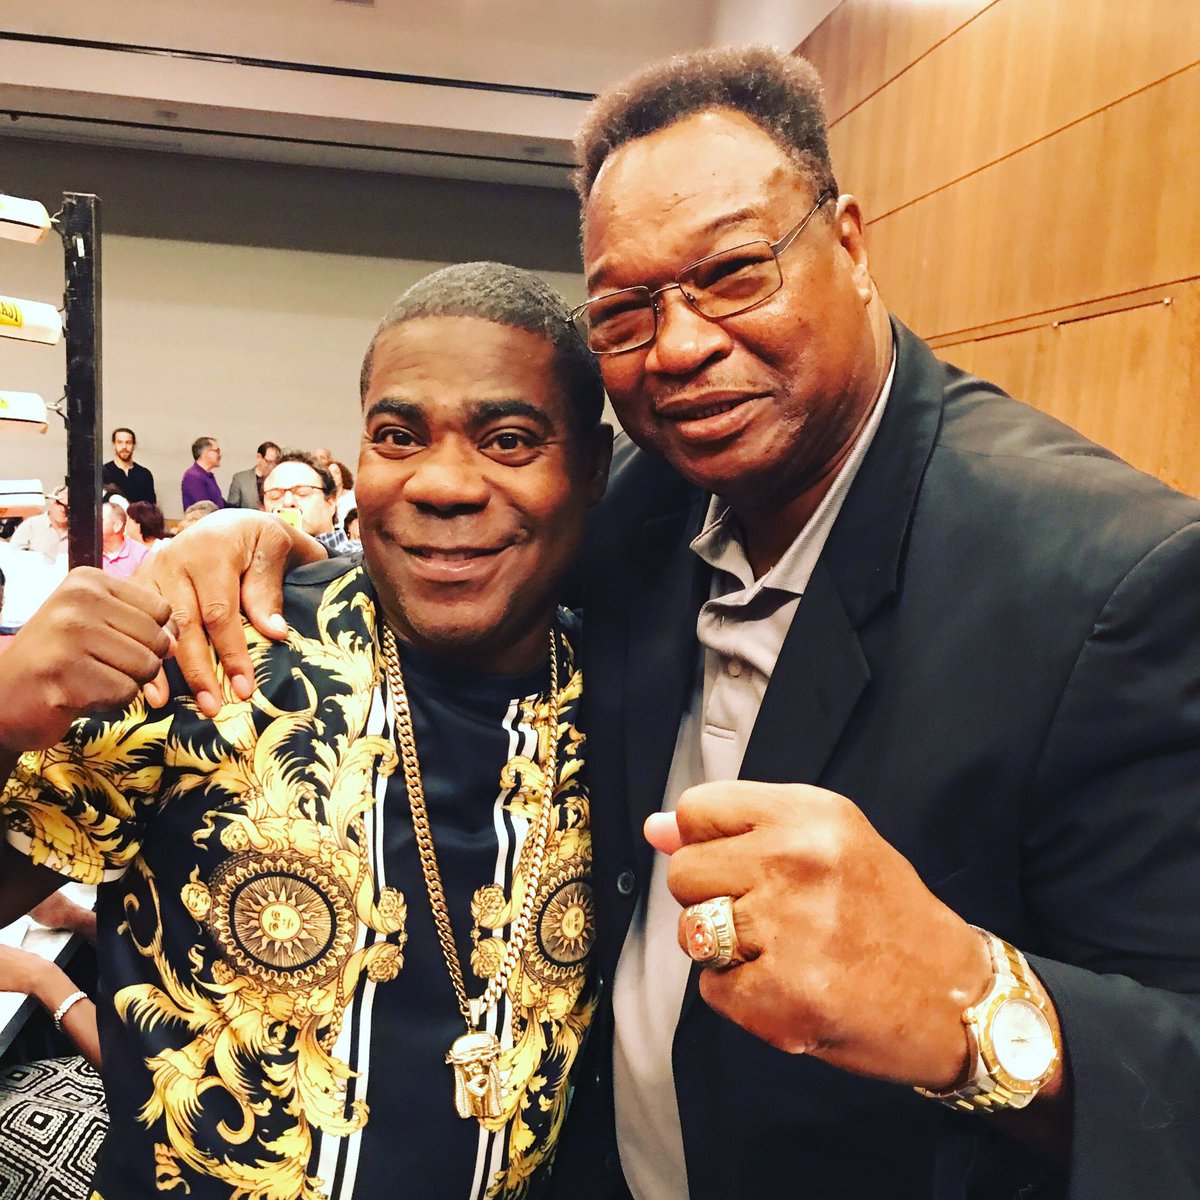 Me and THE CHAMP @LarryHolmes75! https://t.co/aCwoSnC5LO